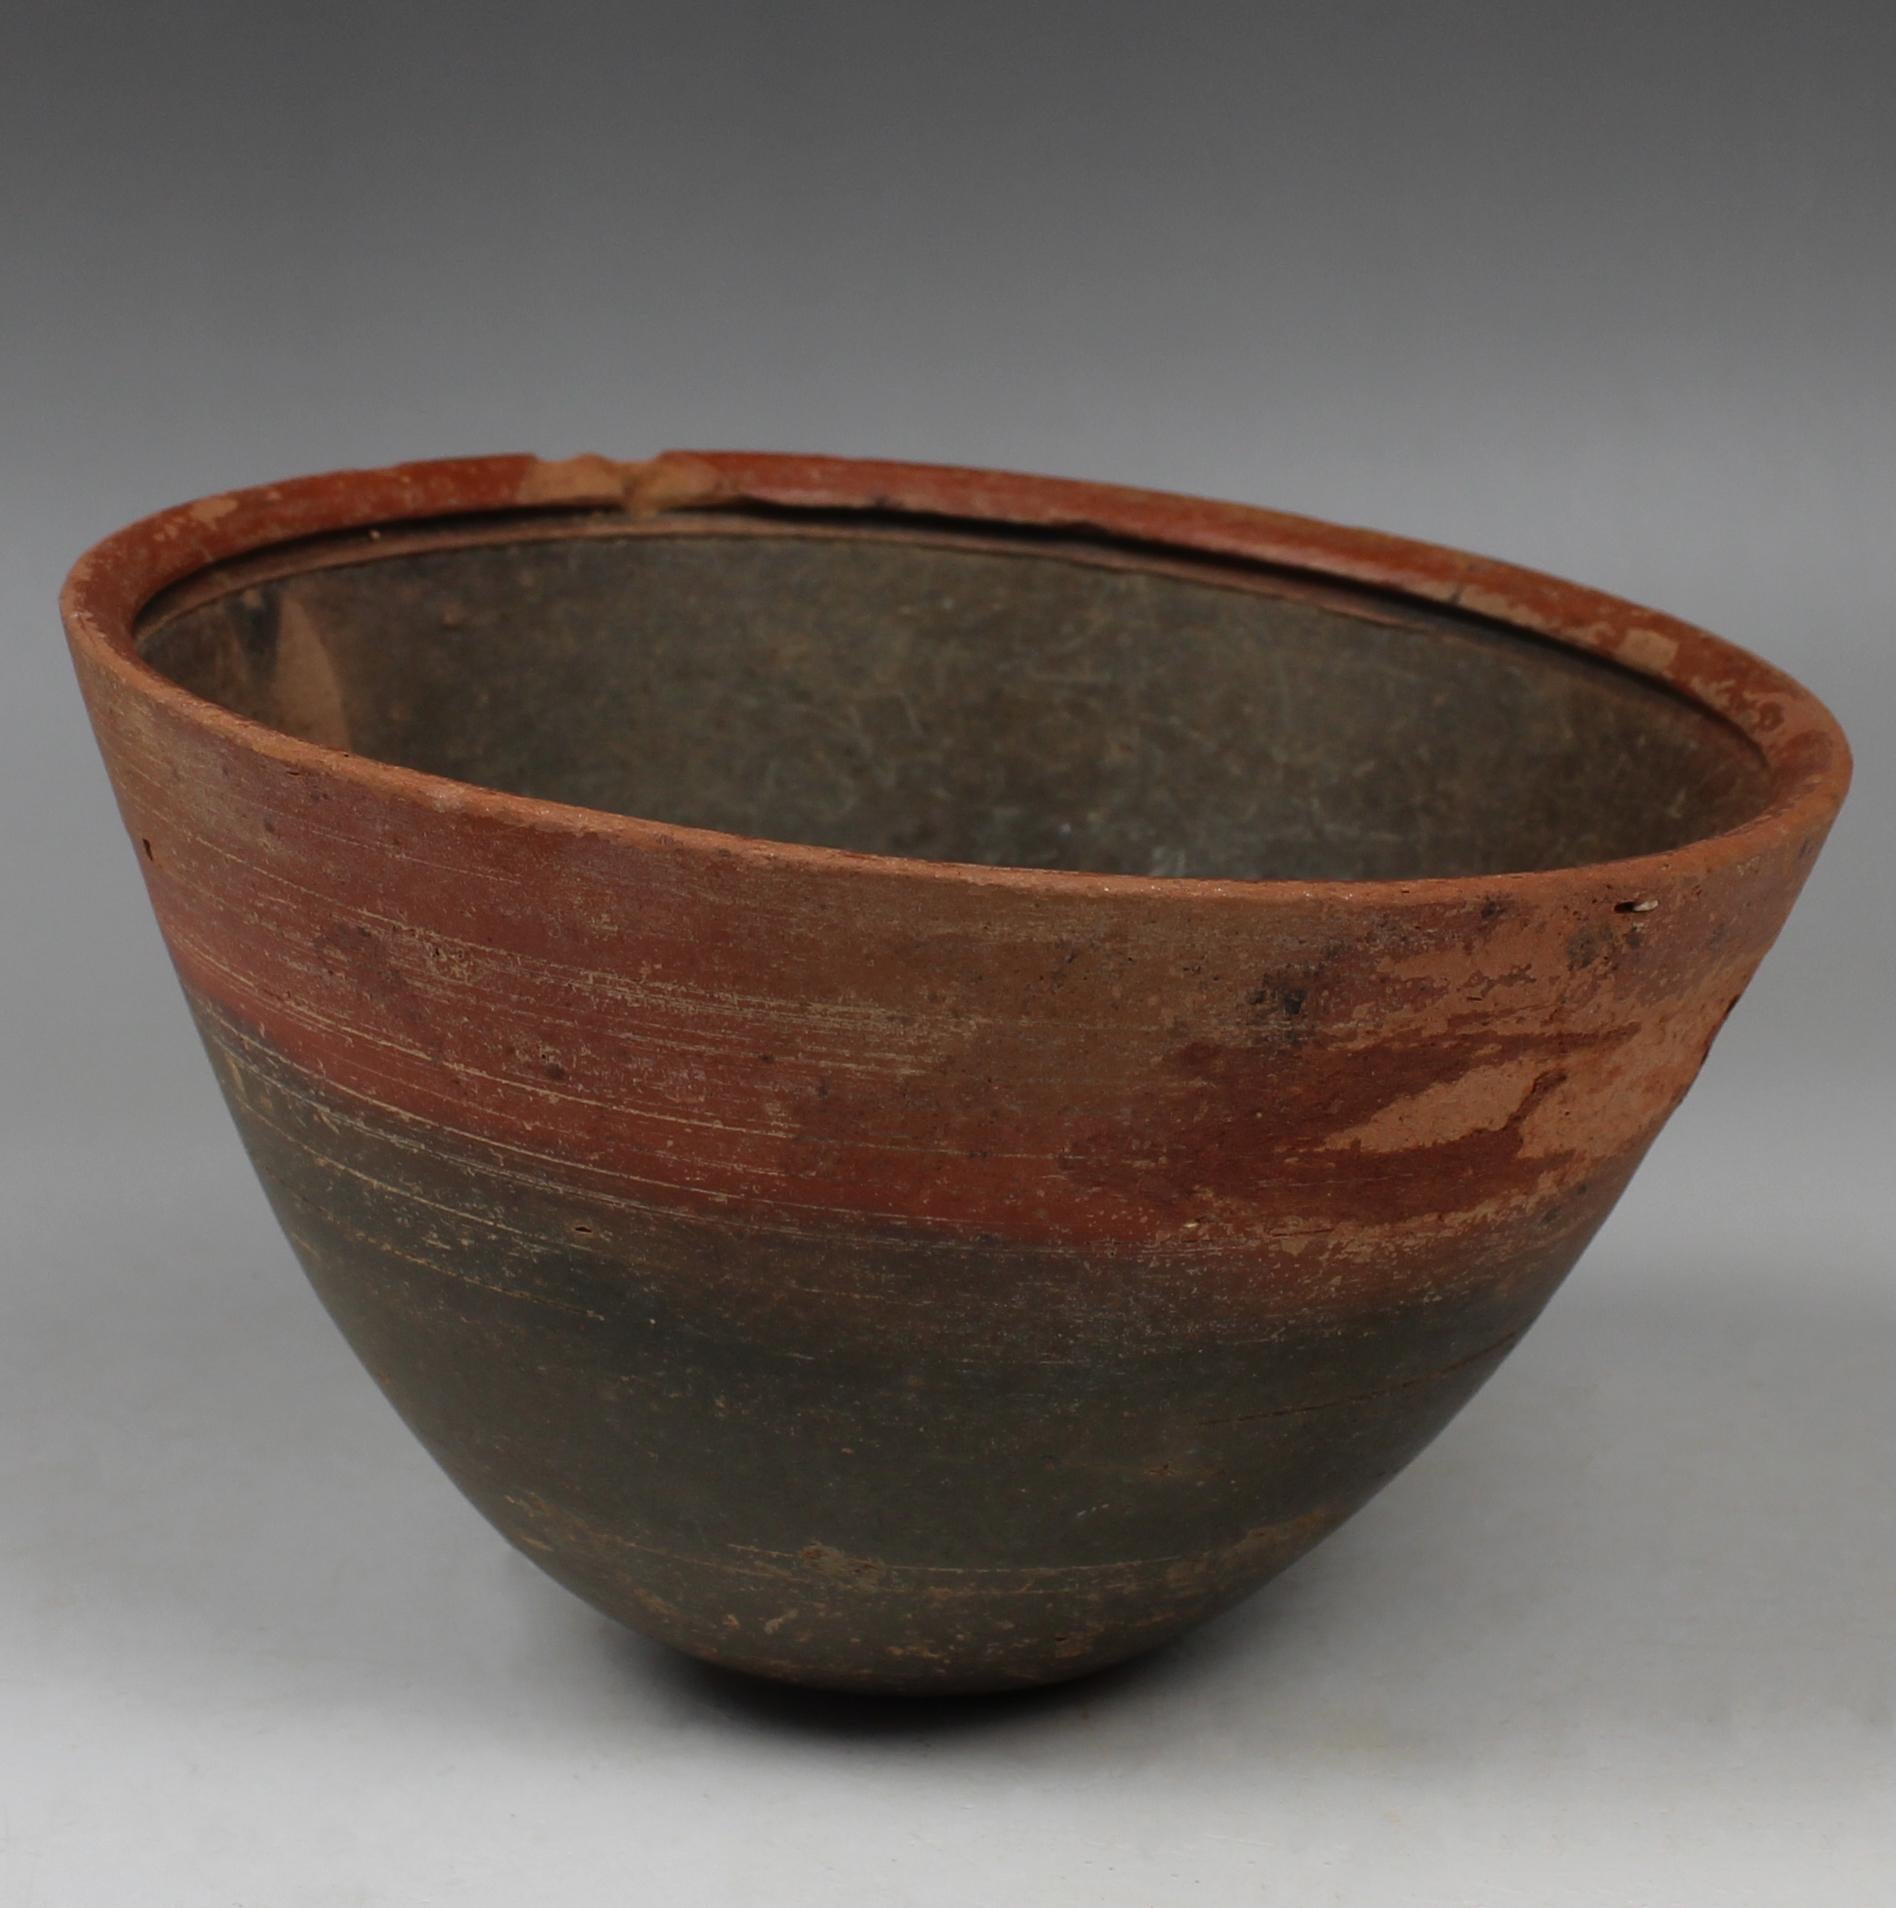 ITEM: Mastoid bowl
MATERIAL: Pottery
CULTURE: Greek, Hellenistic Period
PERIOD: 3rd – 1st Century B.C
DIMENSIONS: 90 mm x 140 mm
CONDITION: Good condition
PROVENANCE: Ex German private collection, B. K., in Germany since before 1950.

Comes with